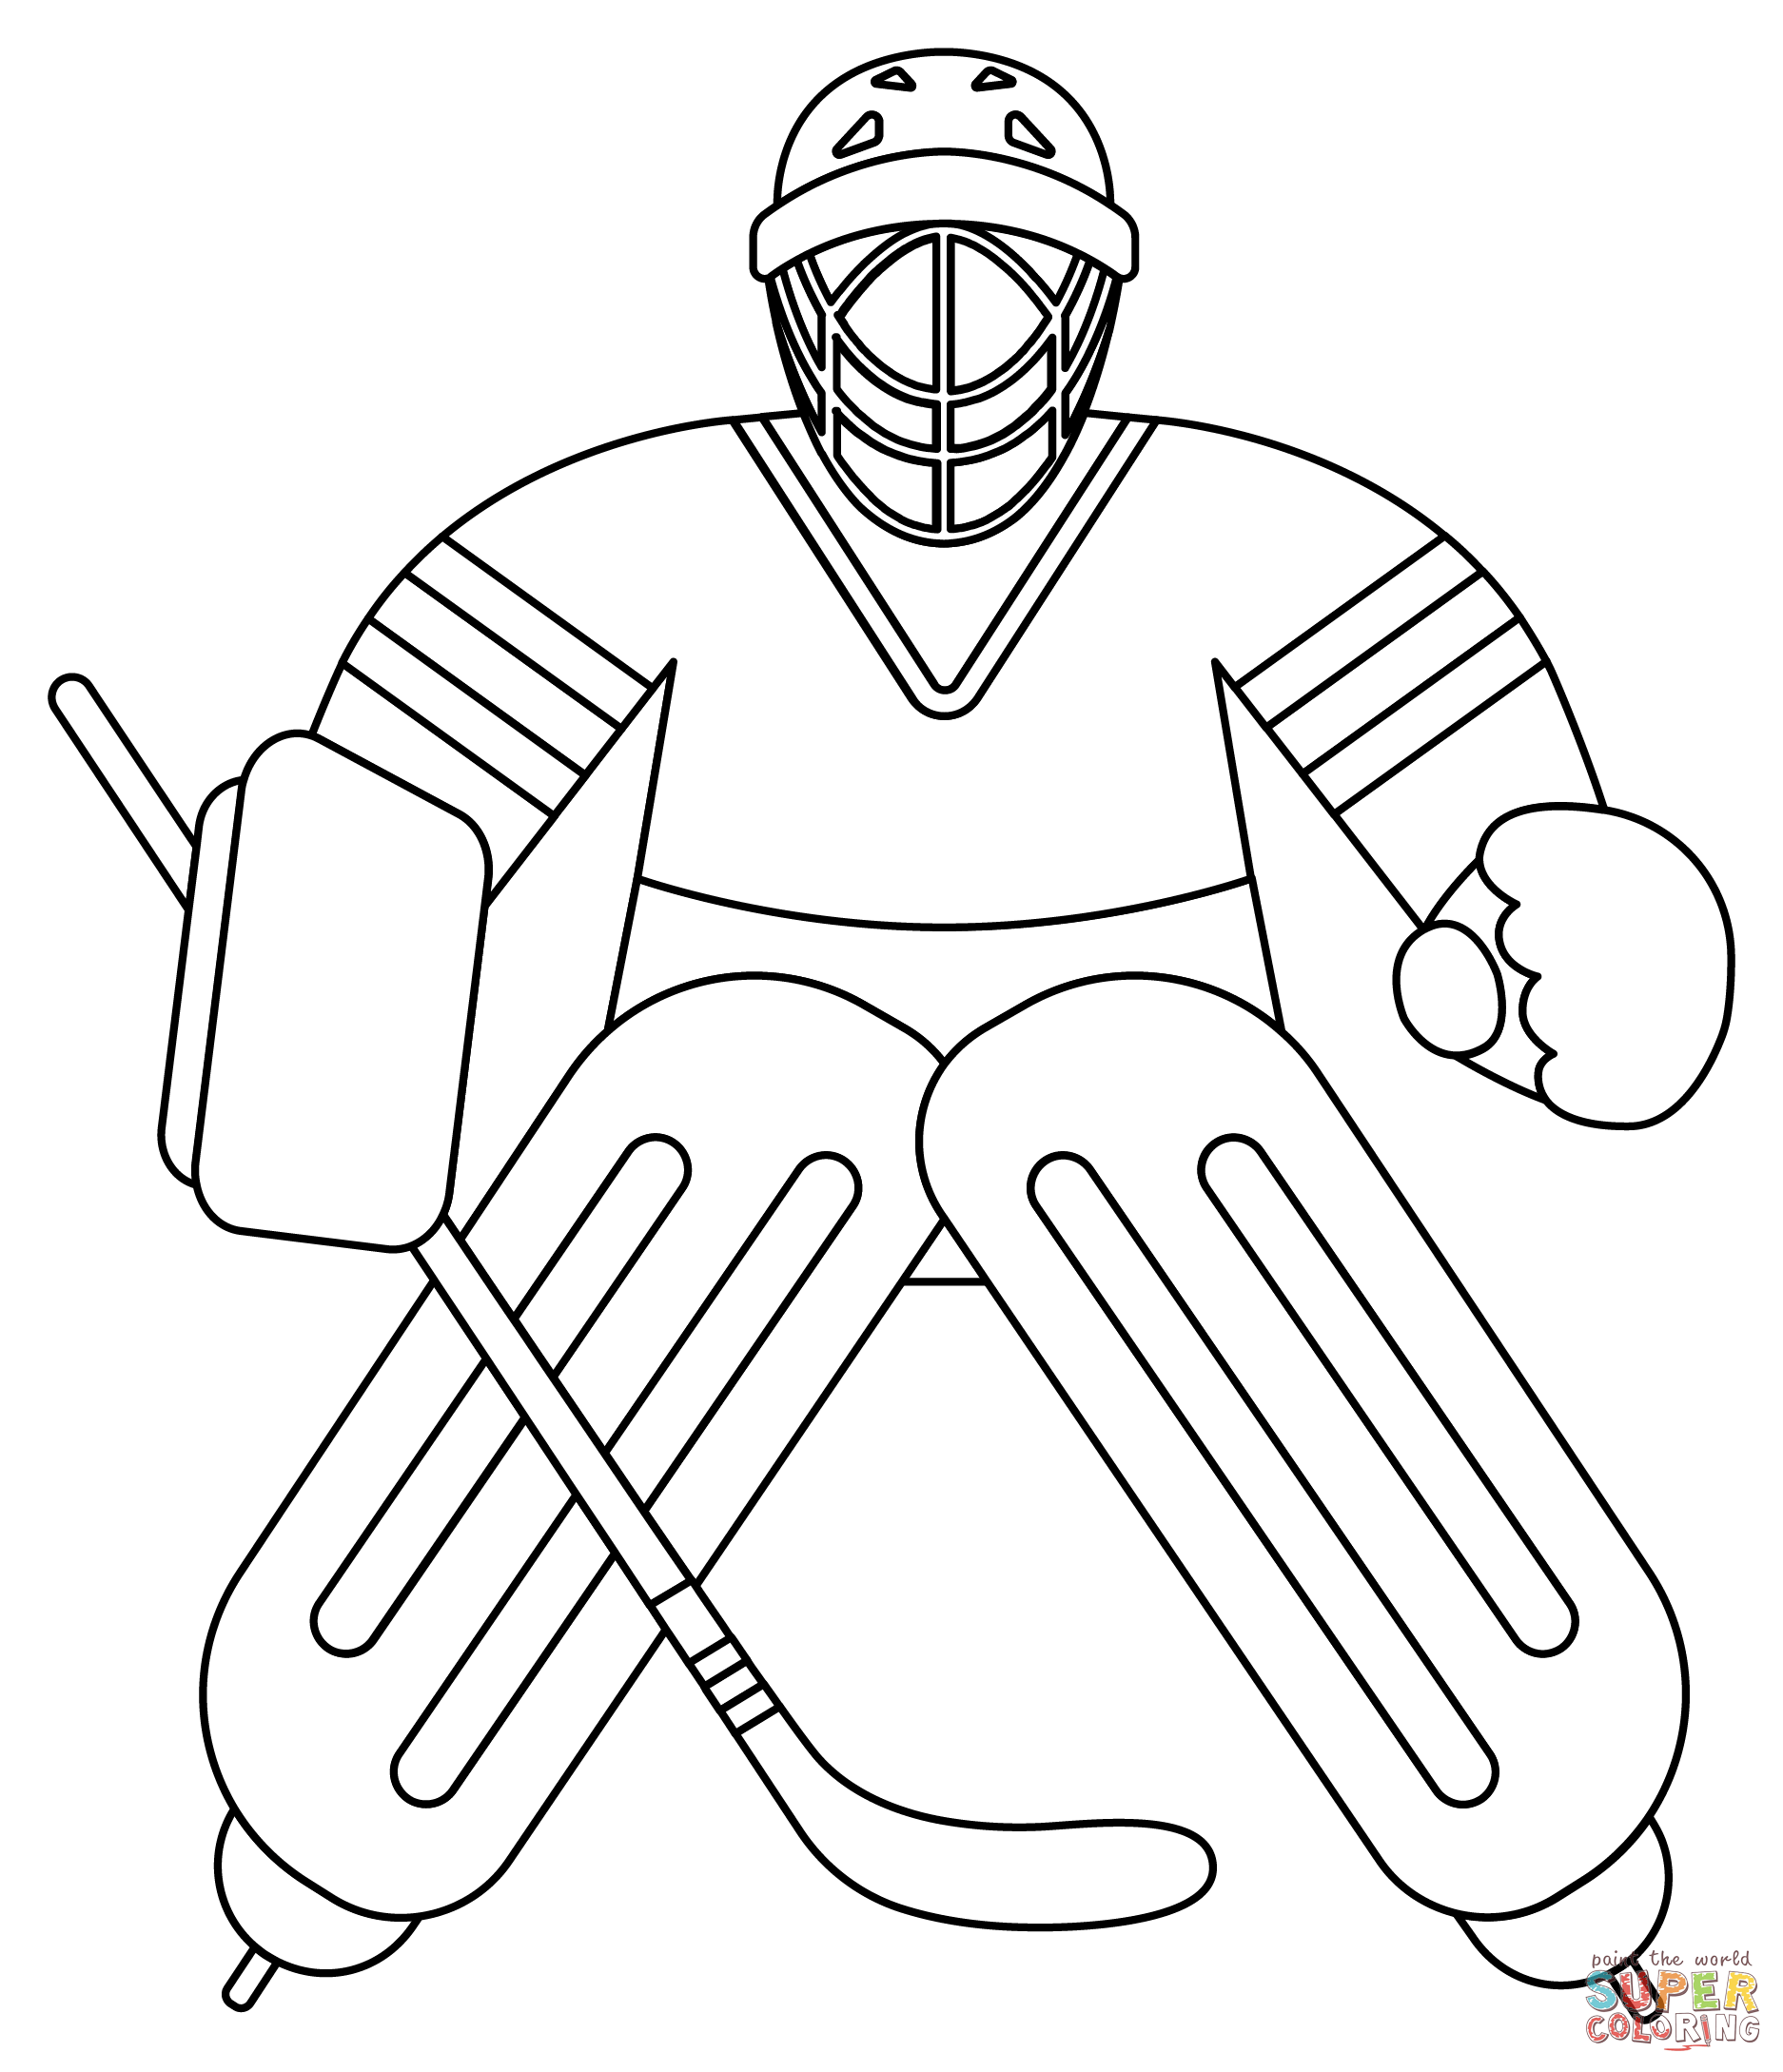 Hockey Goalie coloring page | Free Printable Coloring Pages